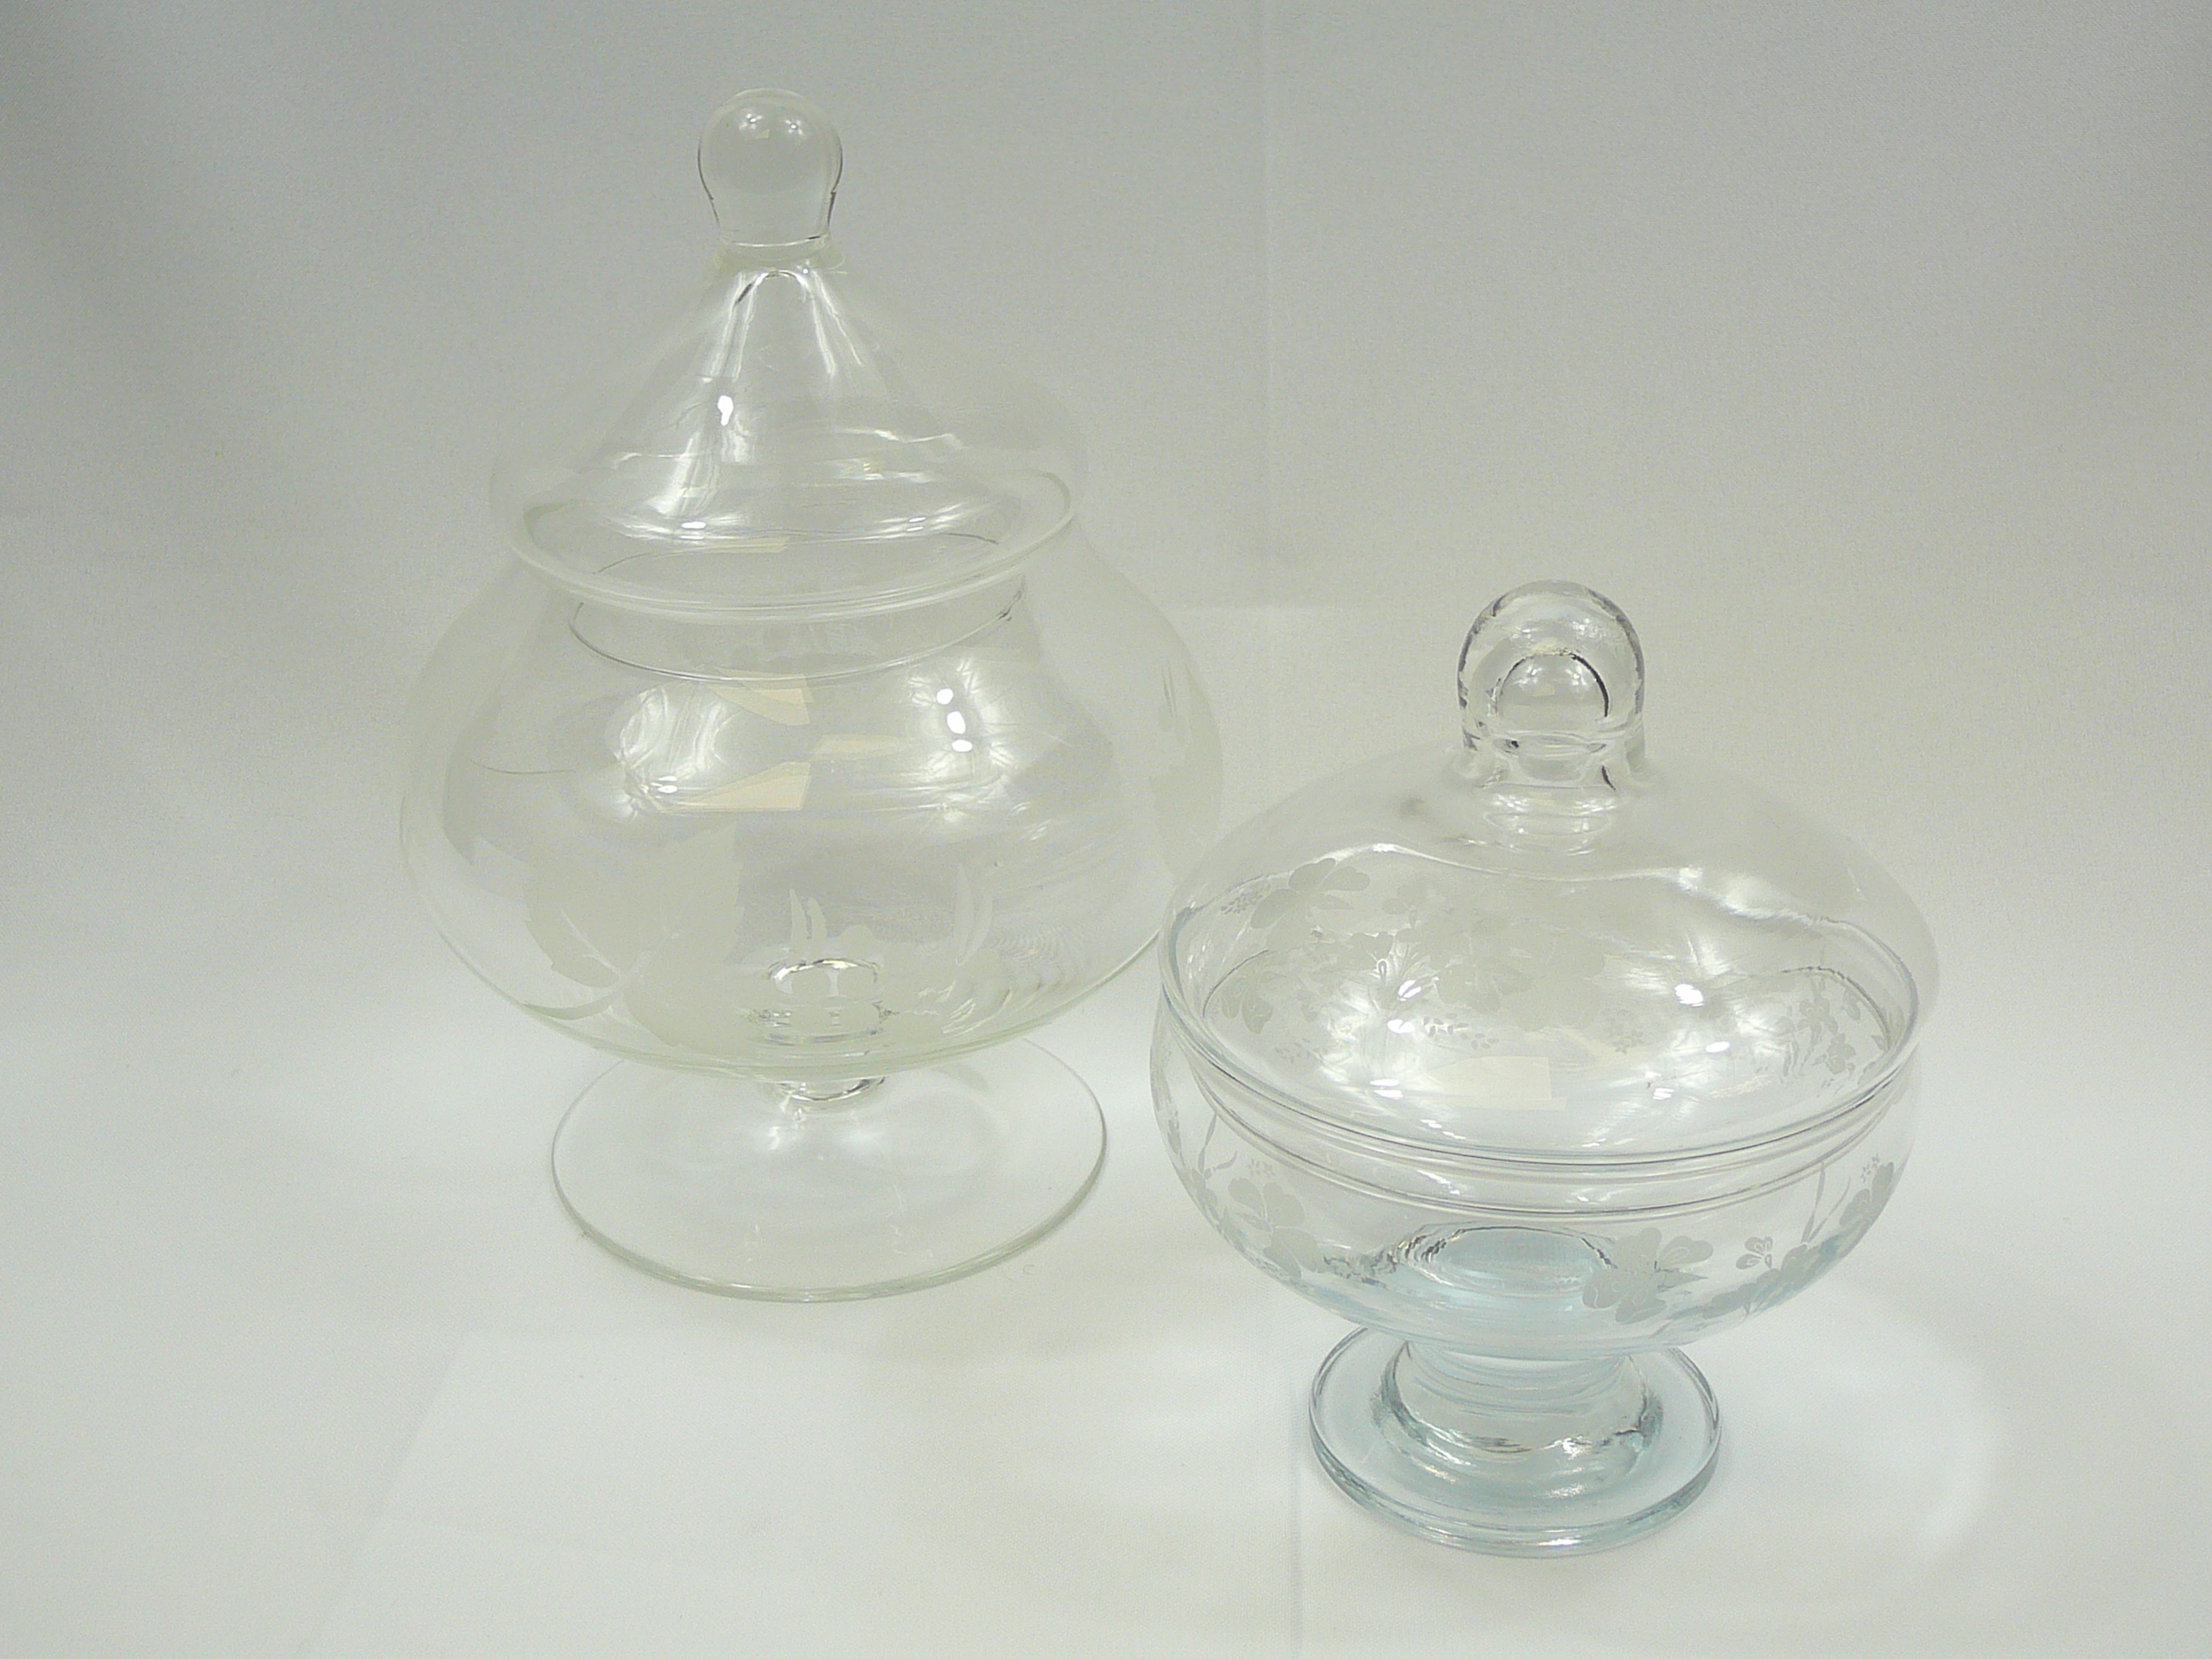 Pair of lidded glass bonbon dishes - Image 3 of 3